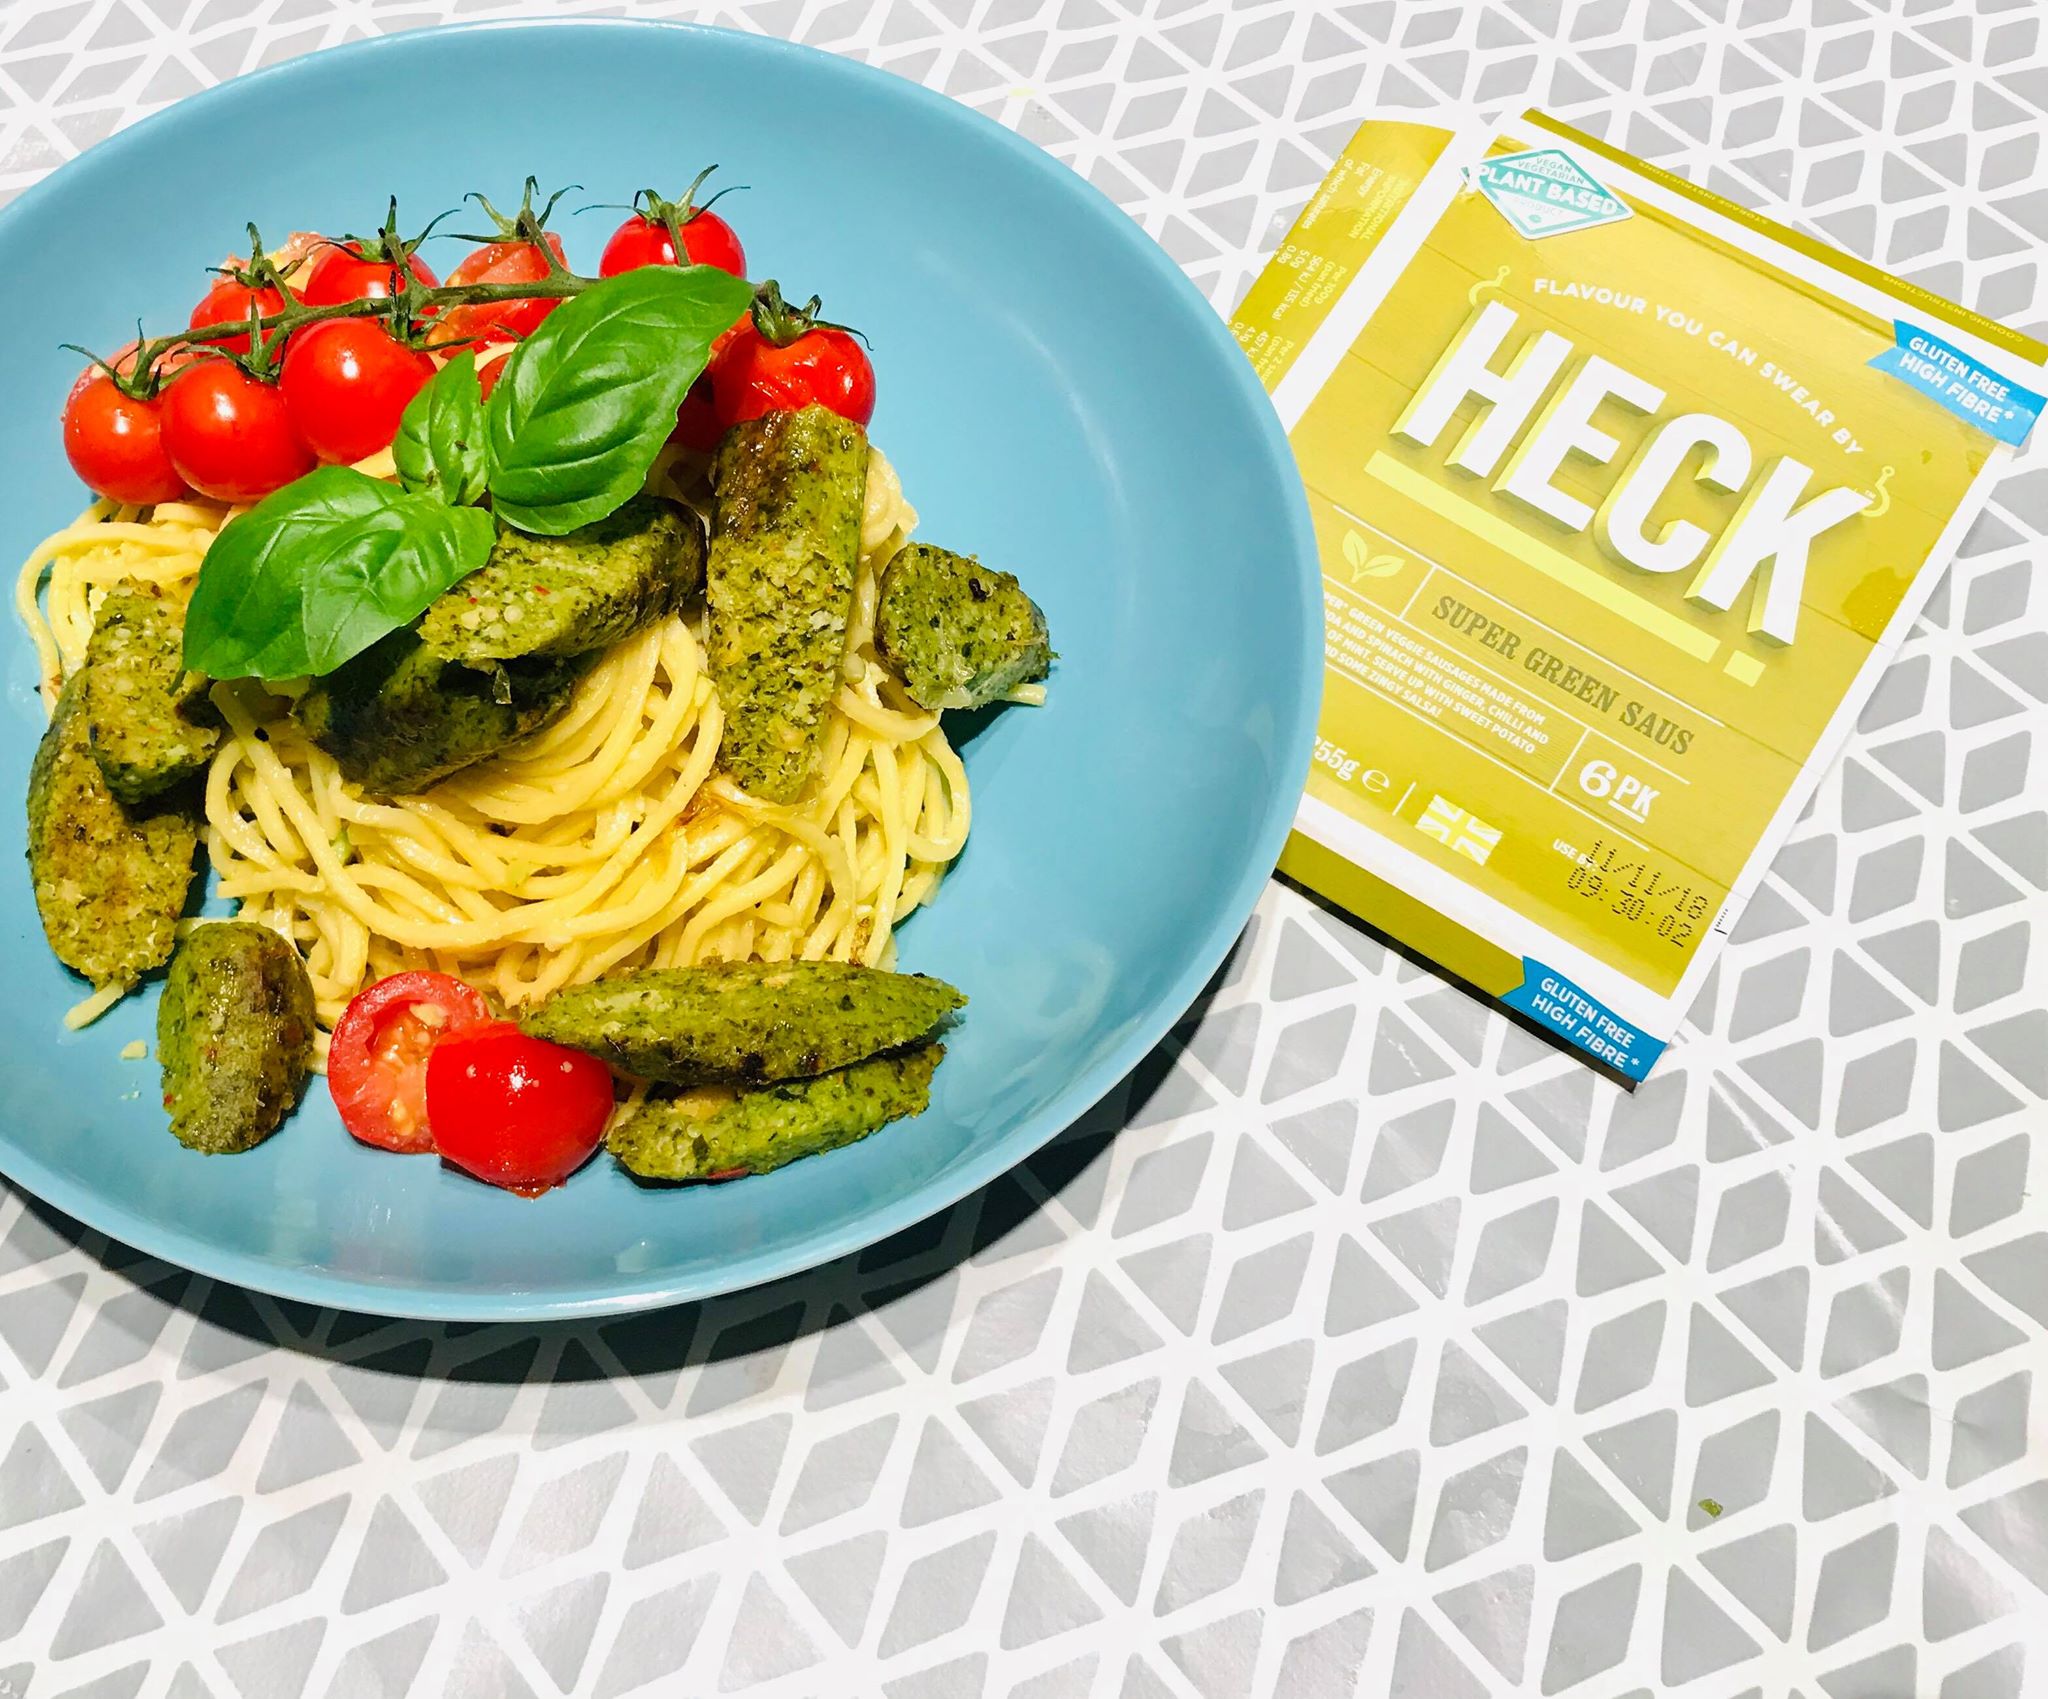 You are currently viewing Vegan Month: With HECK #AD